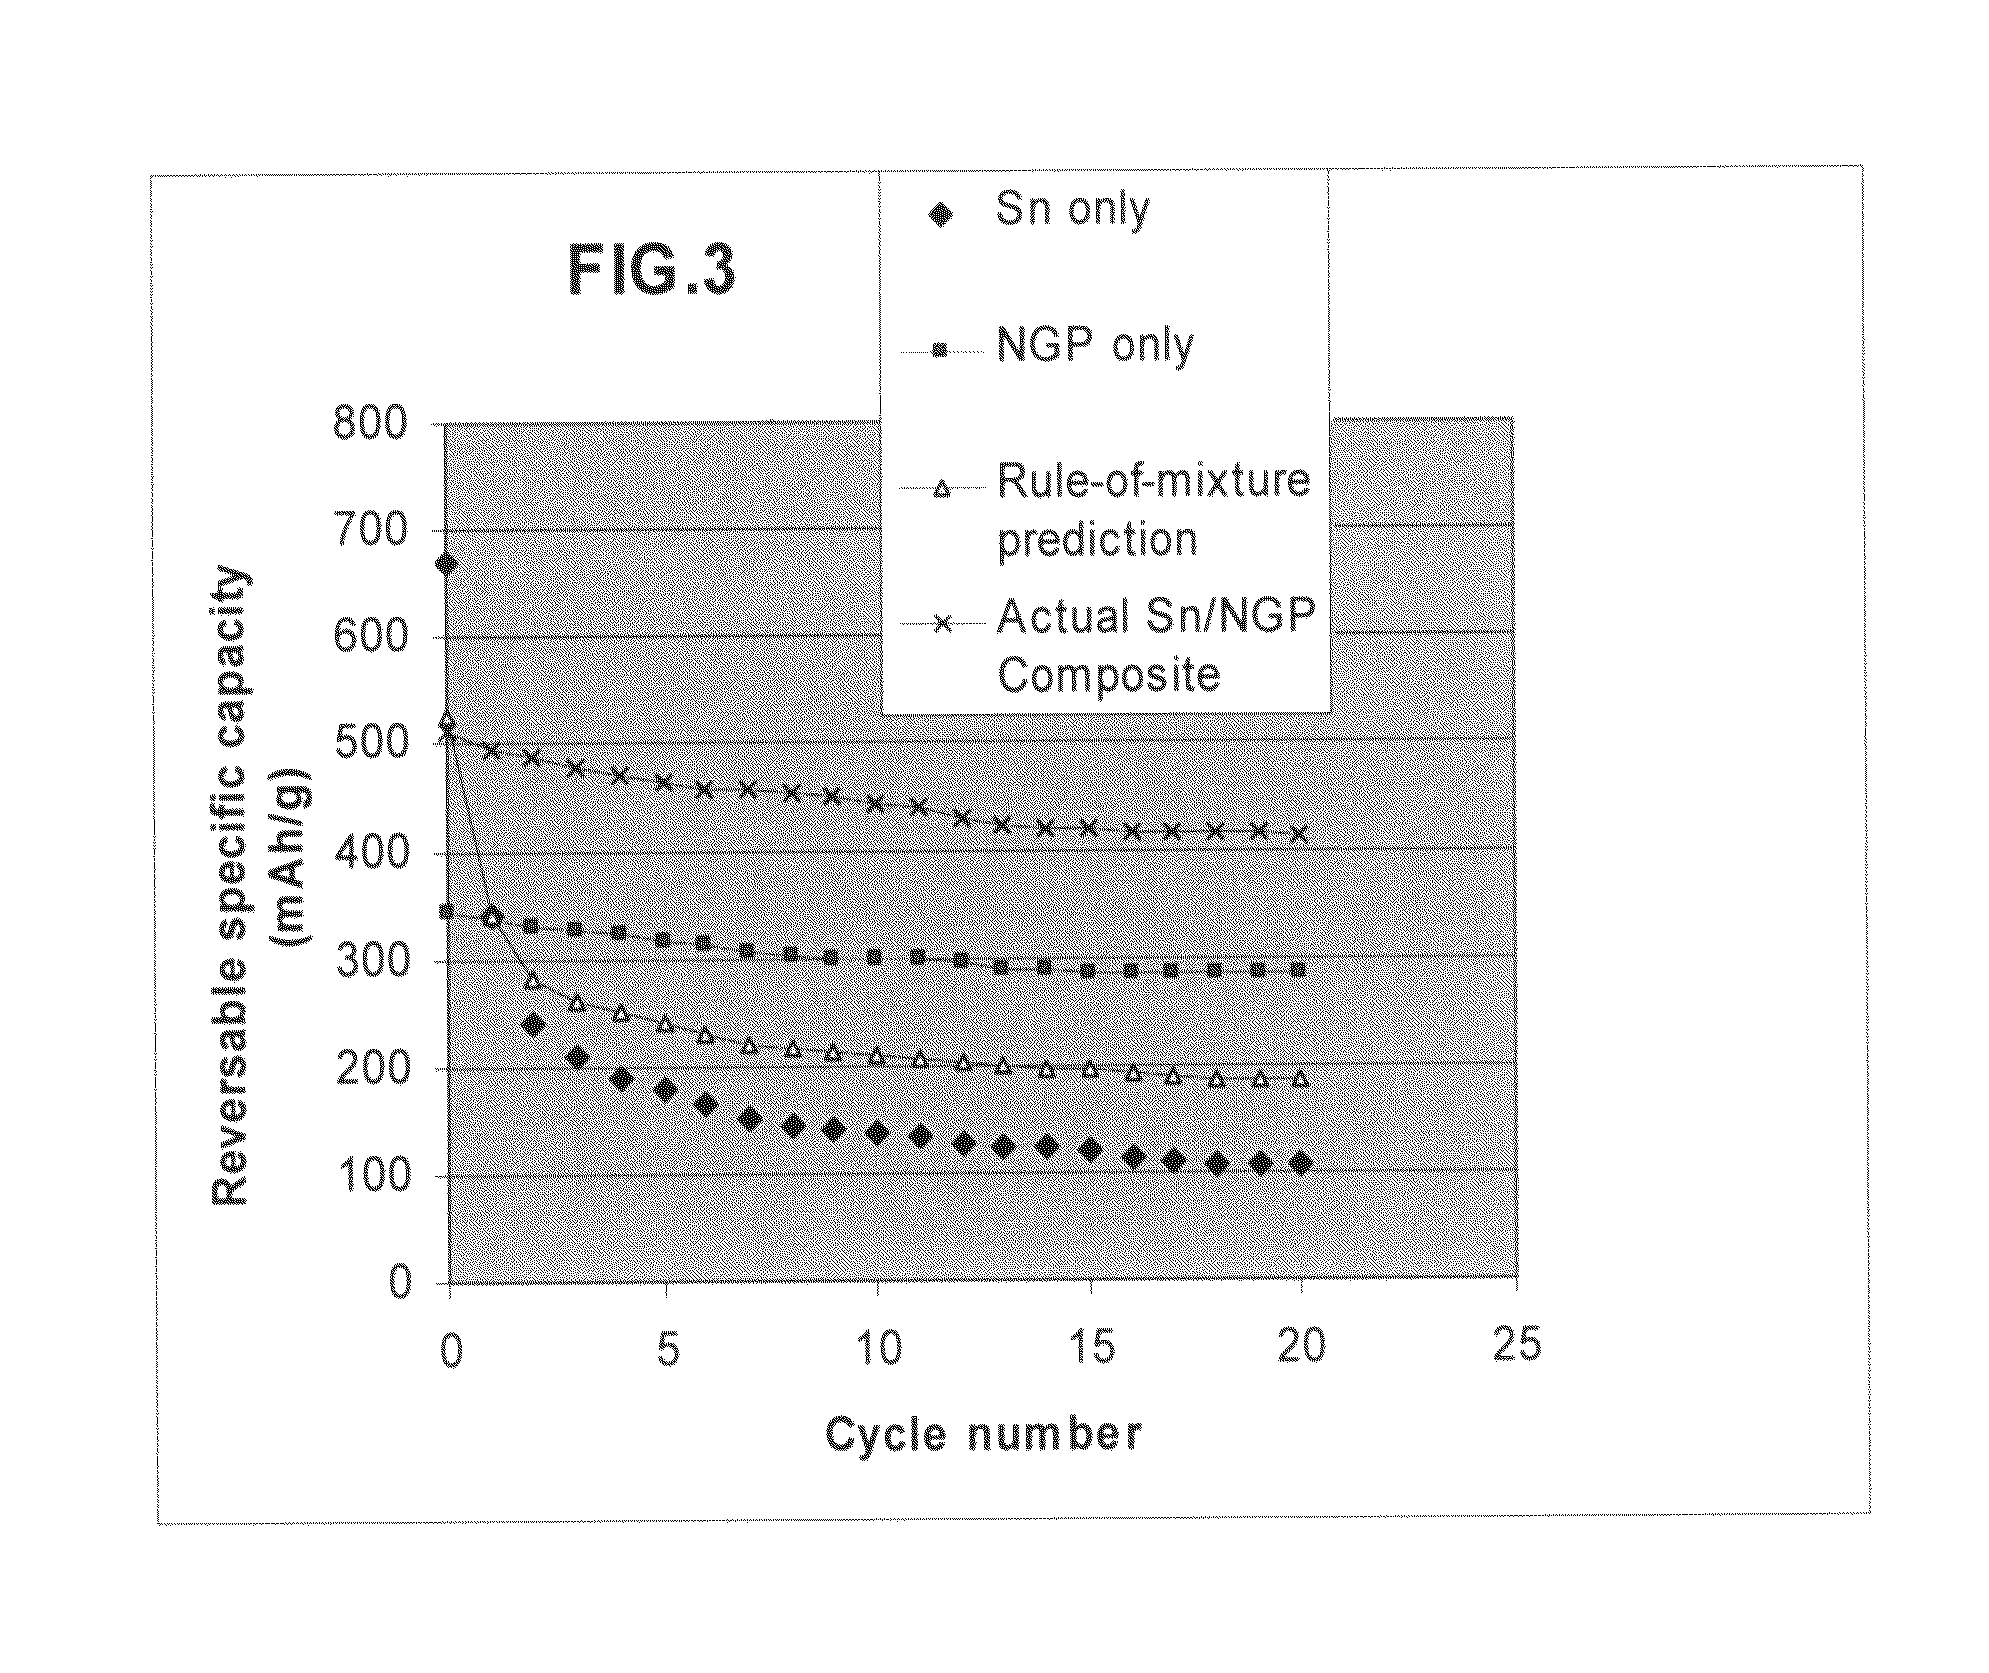 Nano graphene platelet-base composite anode compositions for lithium ion batteries